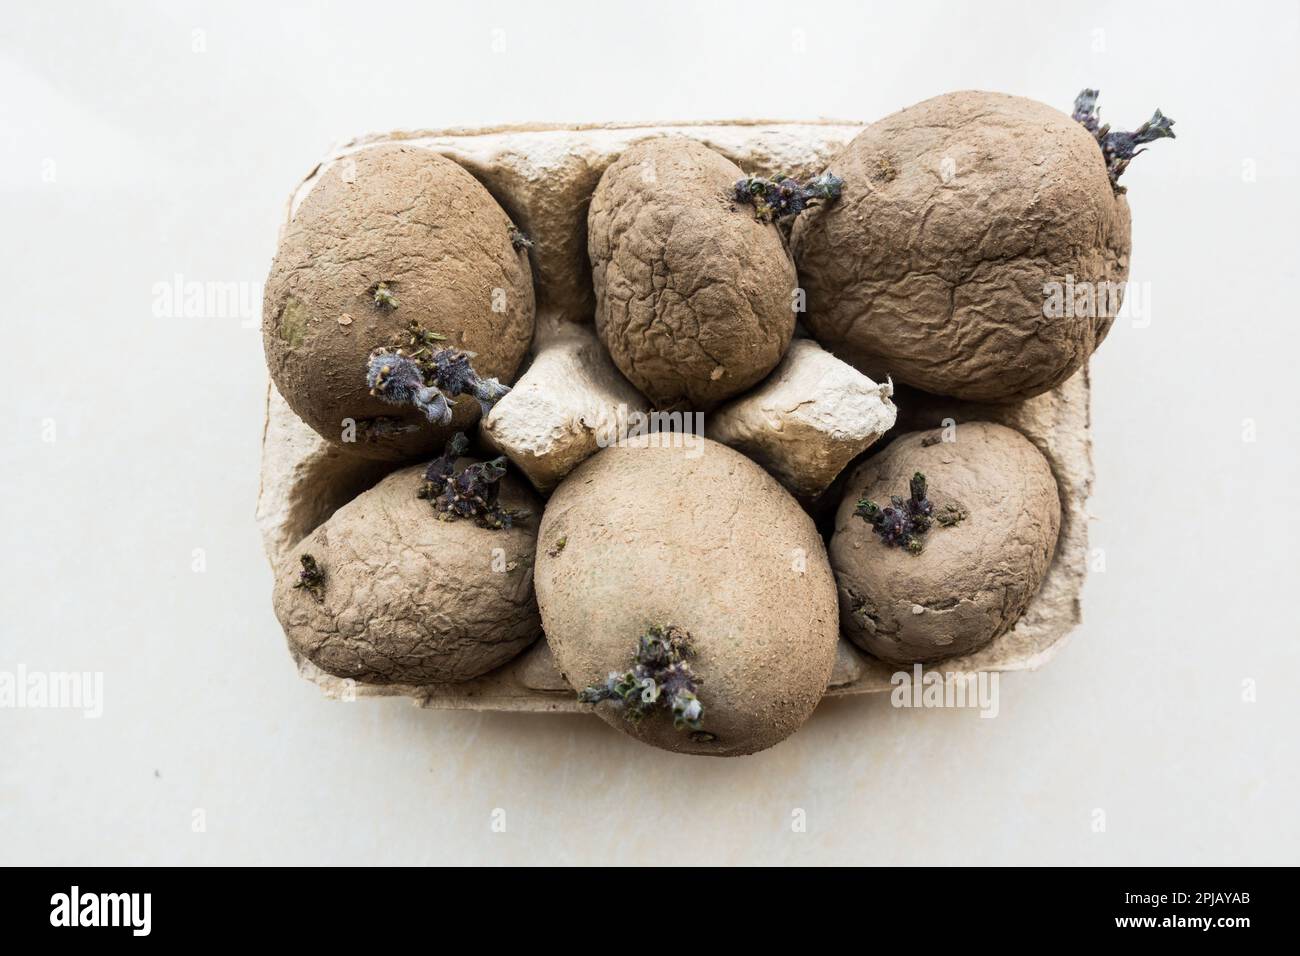 Top down view of potato chitting or sprouting in egg box indoor Stock Photo